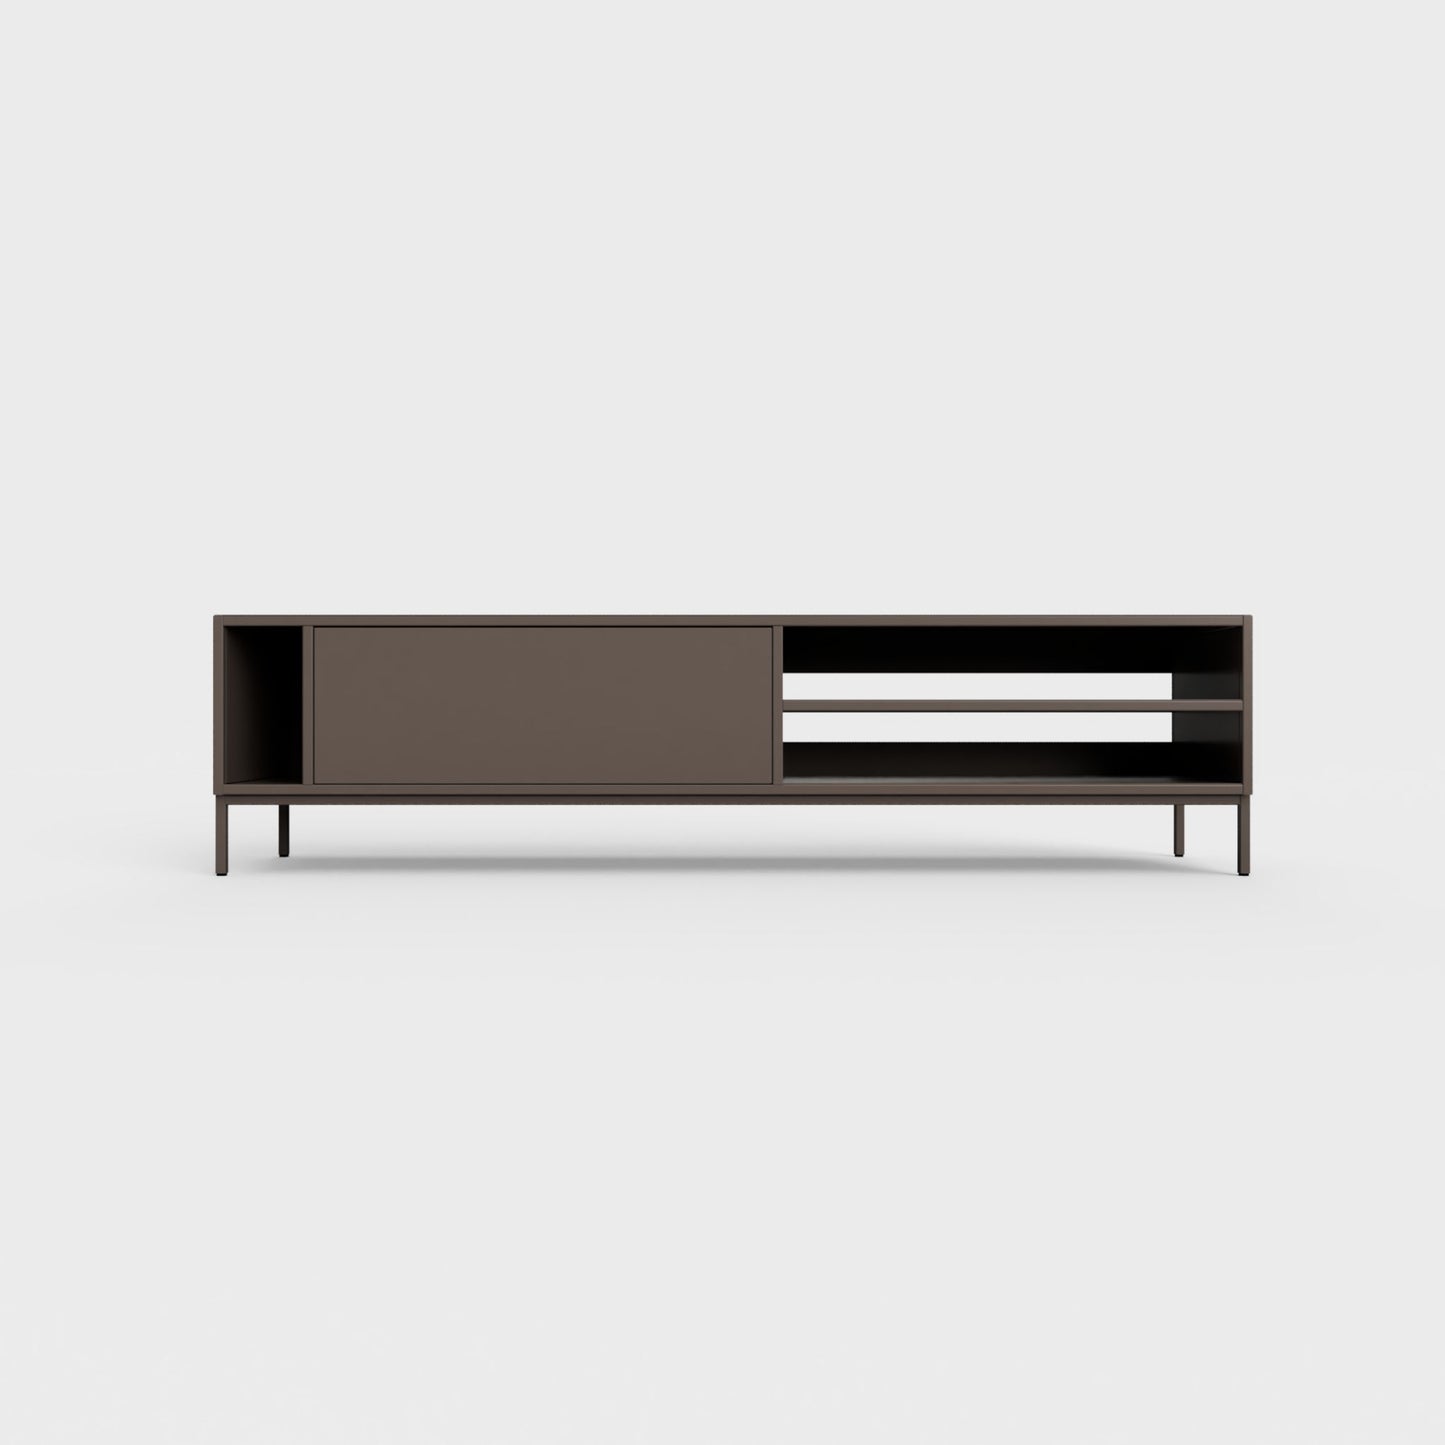 Prunus 03 Lowboard in earth brown color, powder-coated steel, elegant and modern piece of furniture for your living room